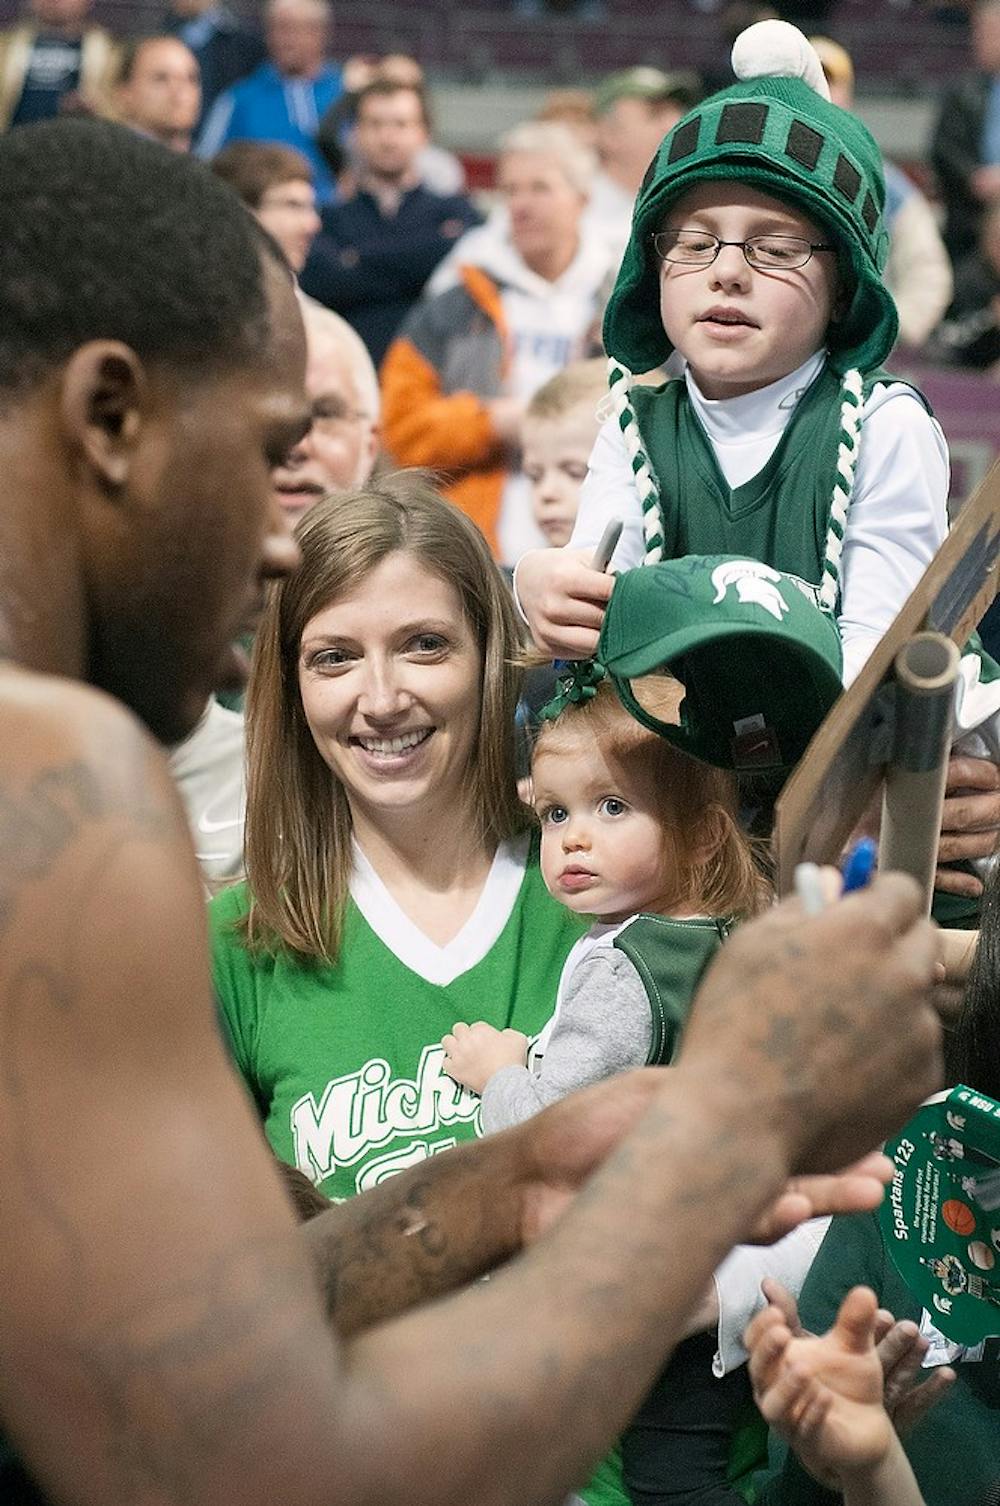 	<p>Senior center Derrick Nix signs items for fans March 20, 2013, at the Palace of Auburn Hills after practice. Nix signed hats, basketballs and other <span class="caps">NCAA</span> memorabilia. Julia Nagy/The State News</p>